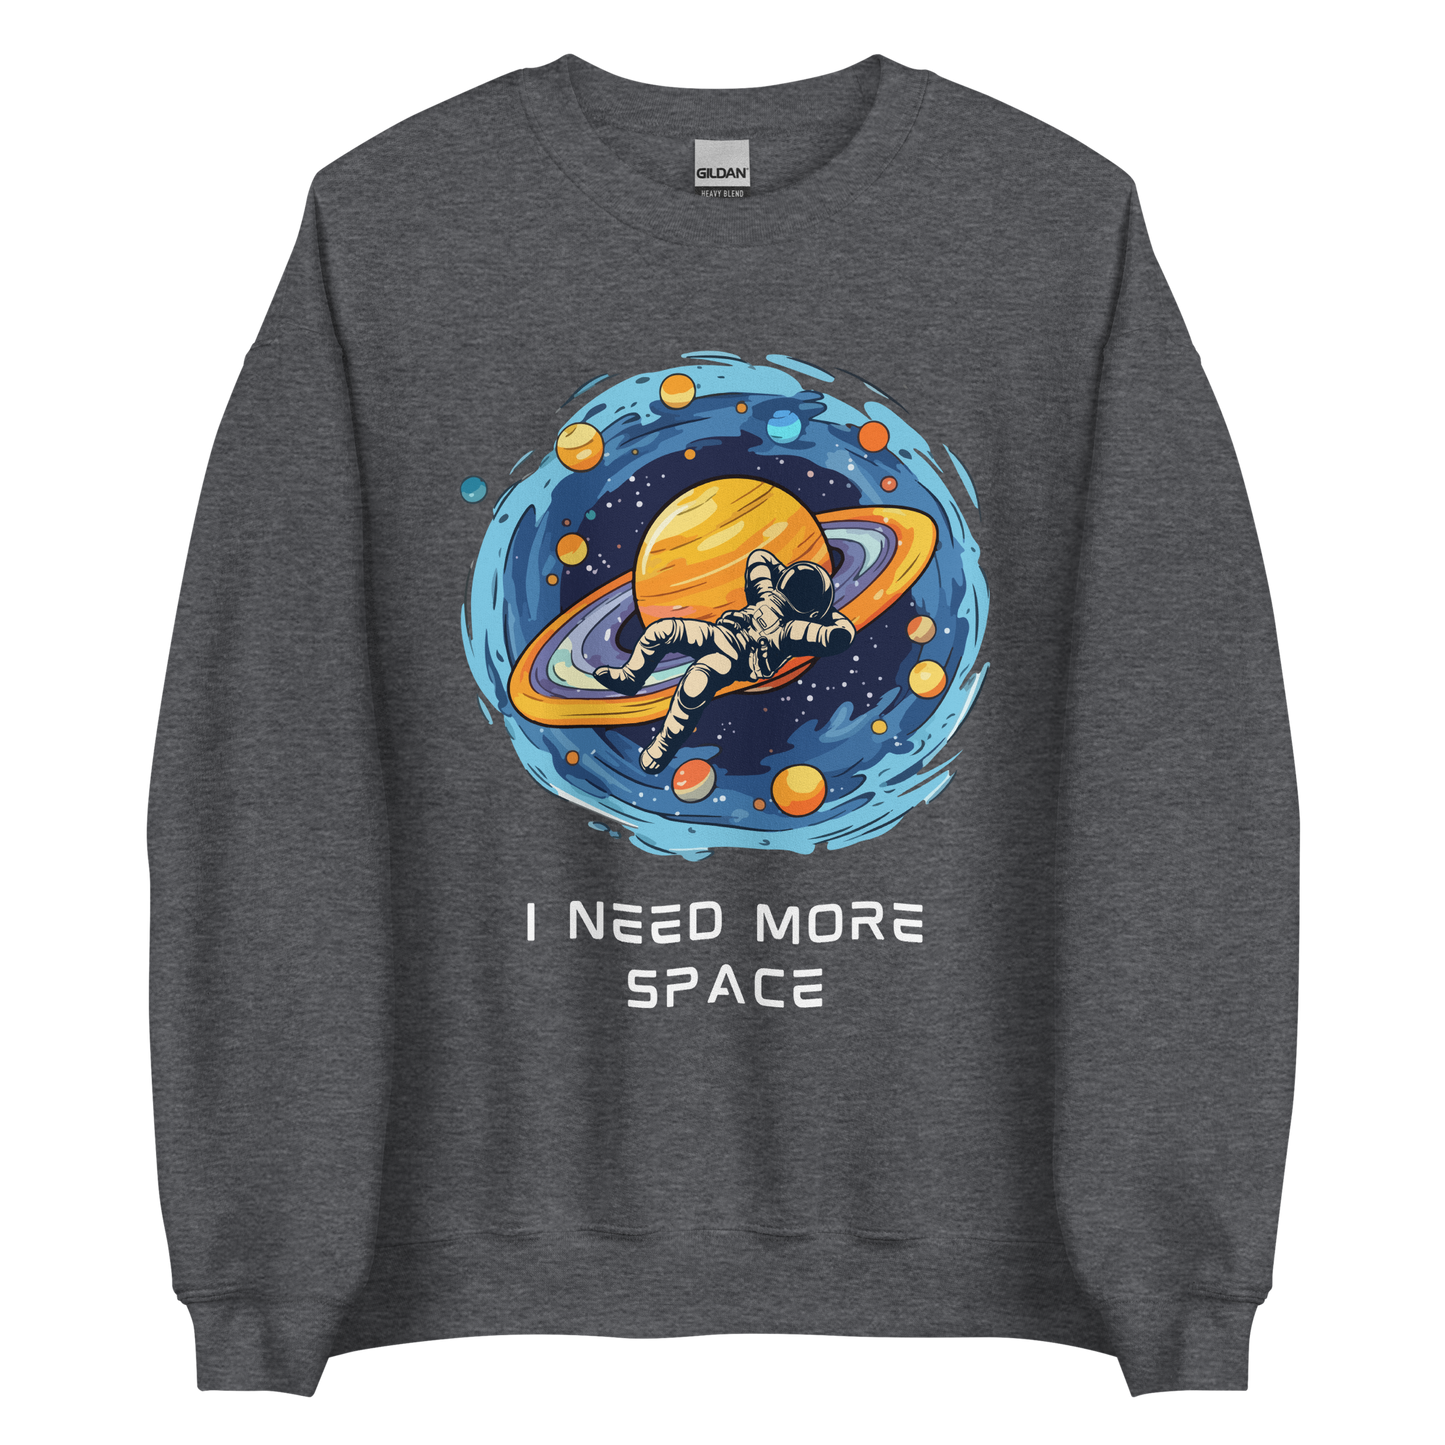 Dark Heather Astronaut Sweatshirt featuring a captivating I Need More Space graphic on the chest - Funny Graphic Space Sweatshirts - Boozy Fox